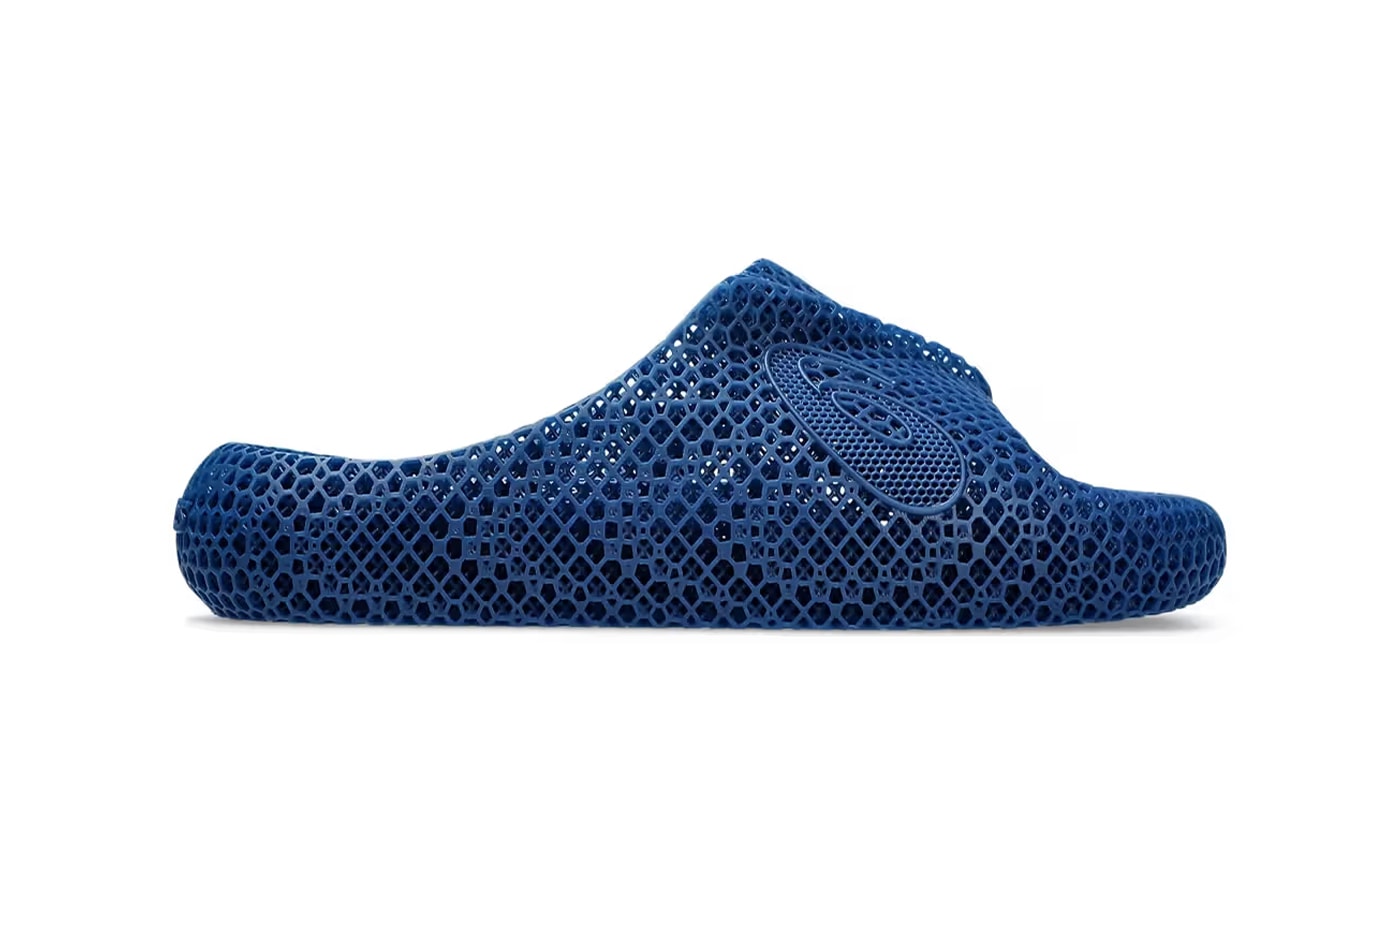 asics actibreeze 3d slide mako blue release date info store list buying guide photos price 